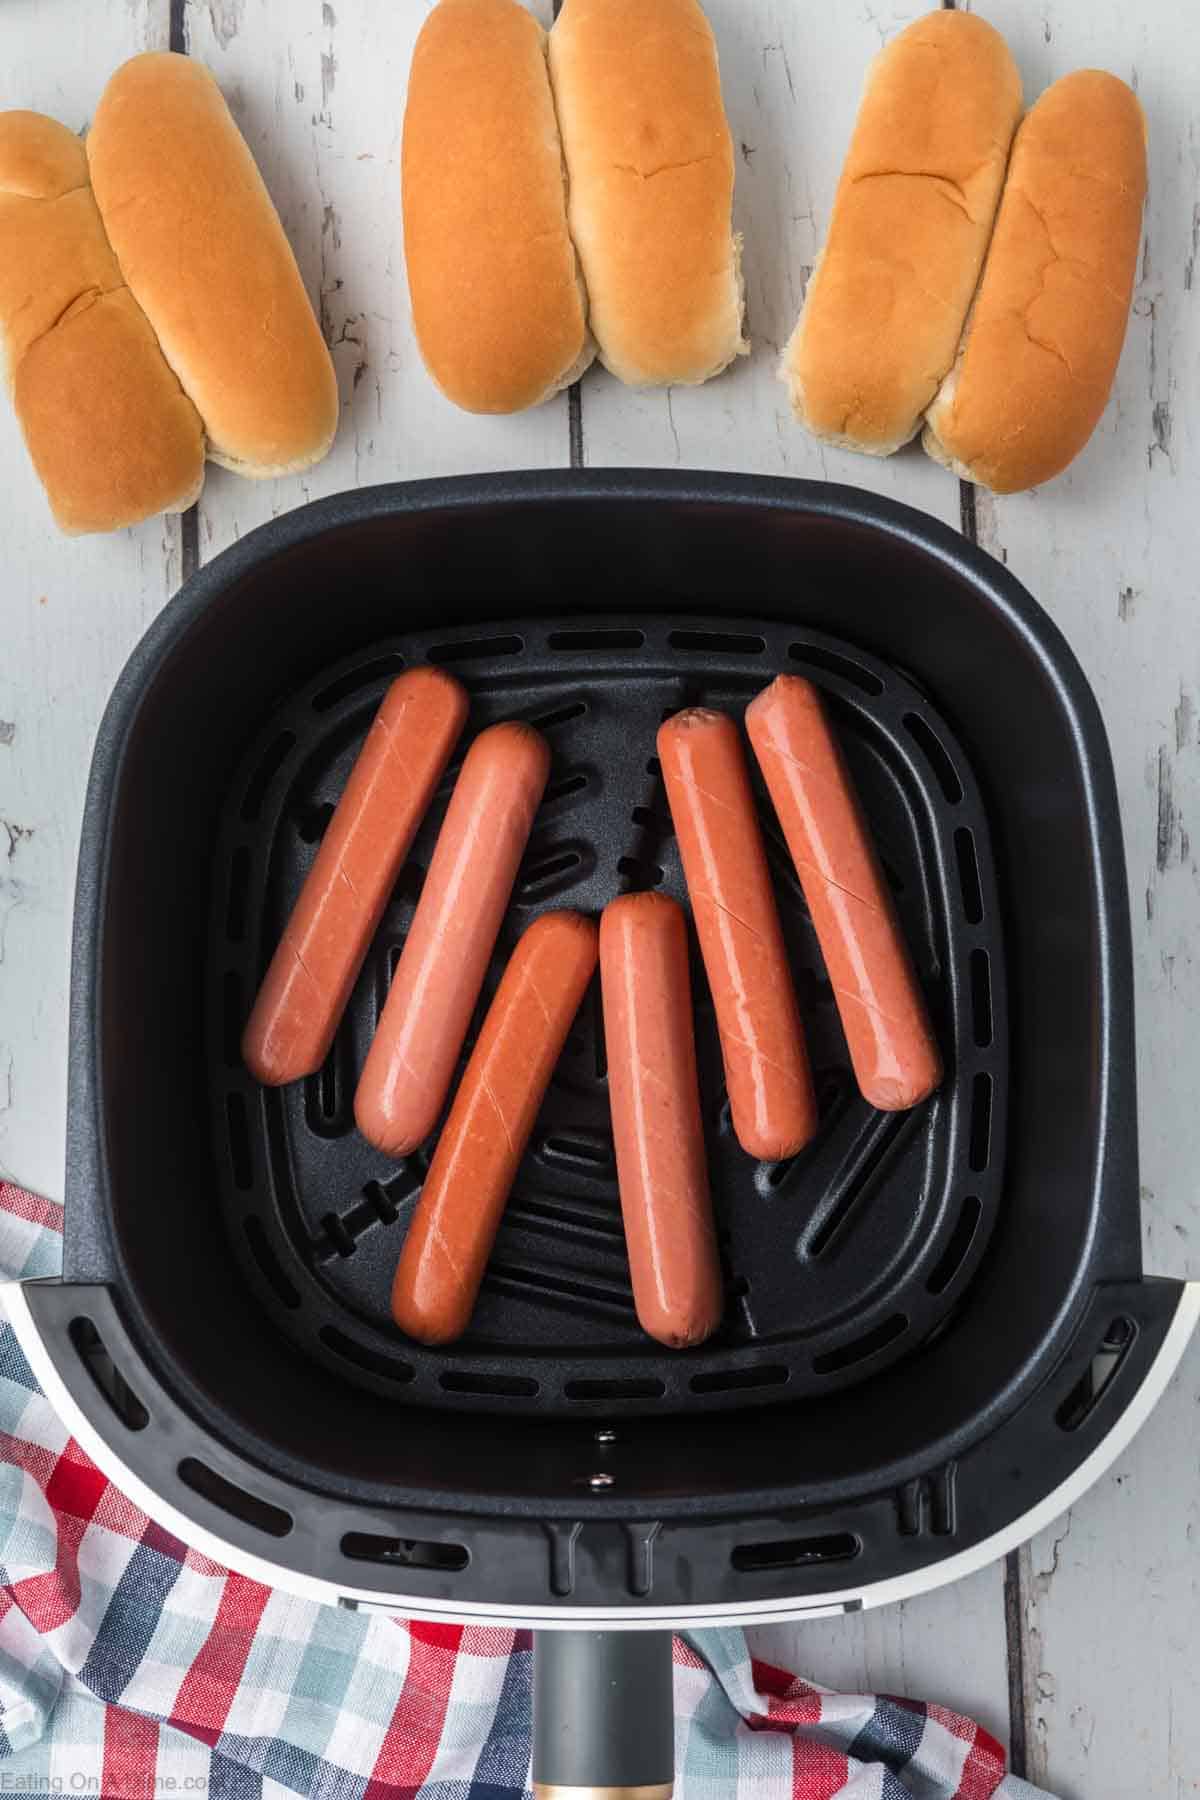 Hot dogs in the air fryer basket with a hot dogs buns on the side